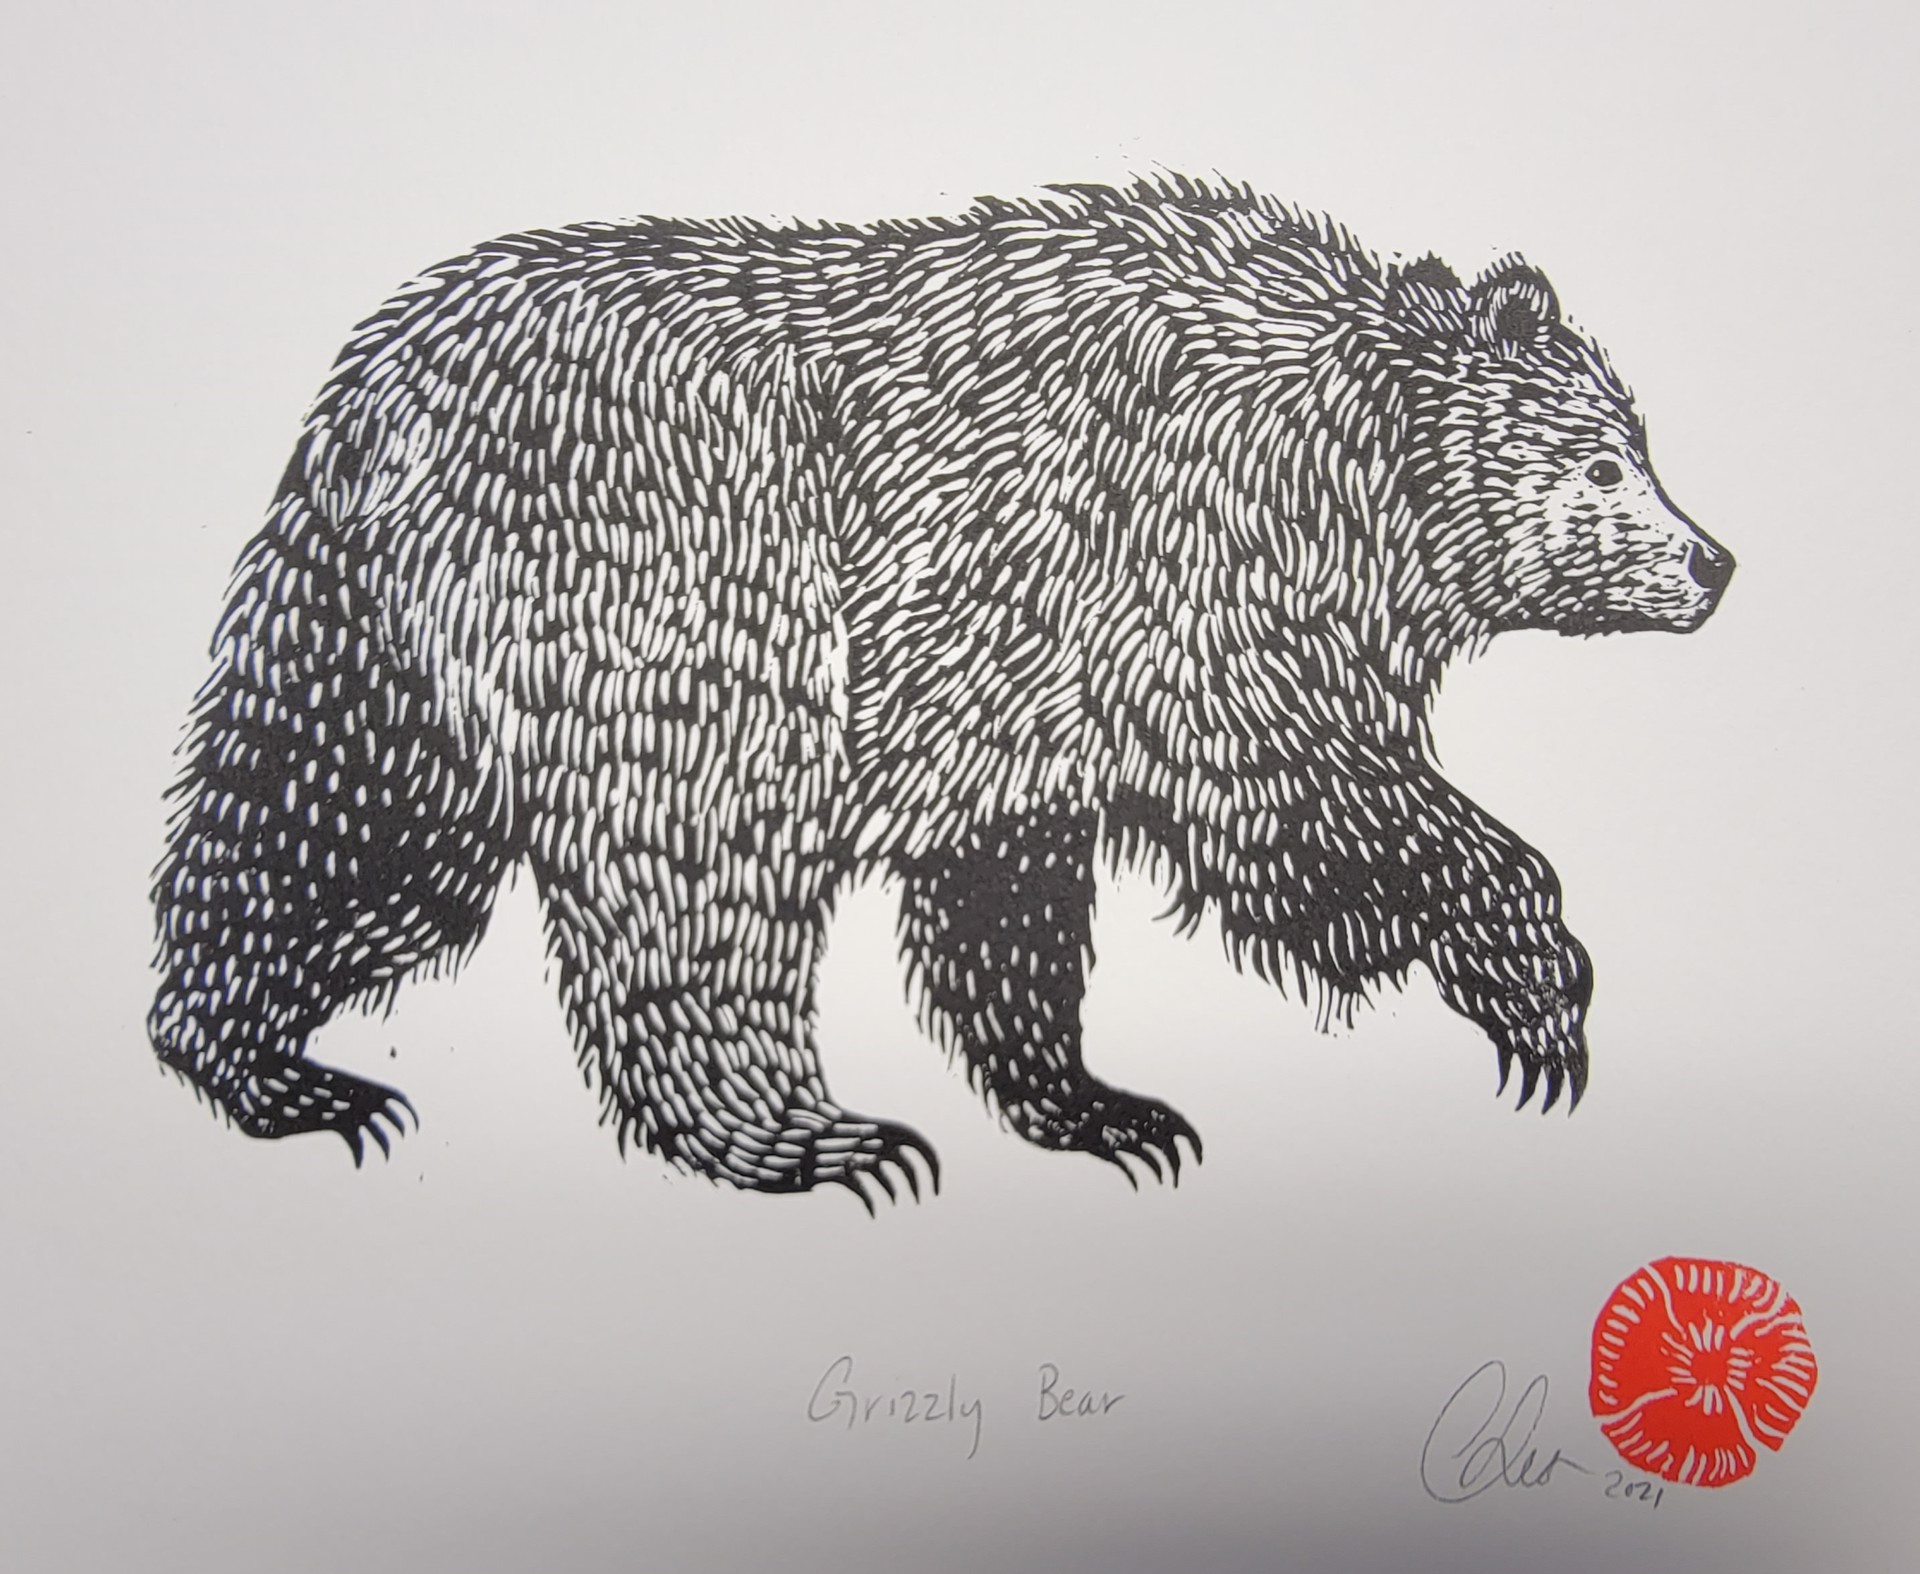 Grizzly Bear by Christine Sutton